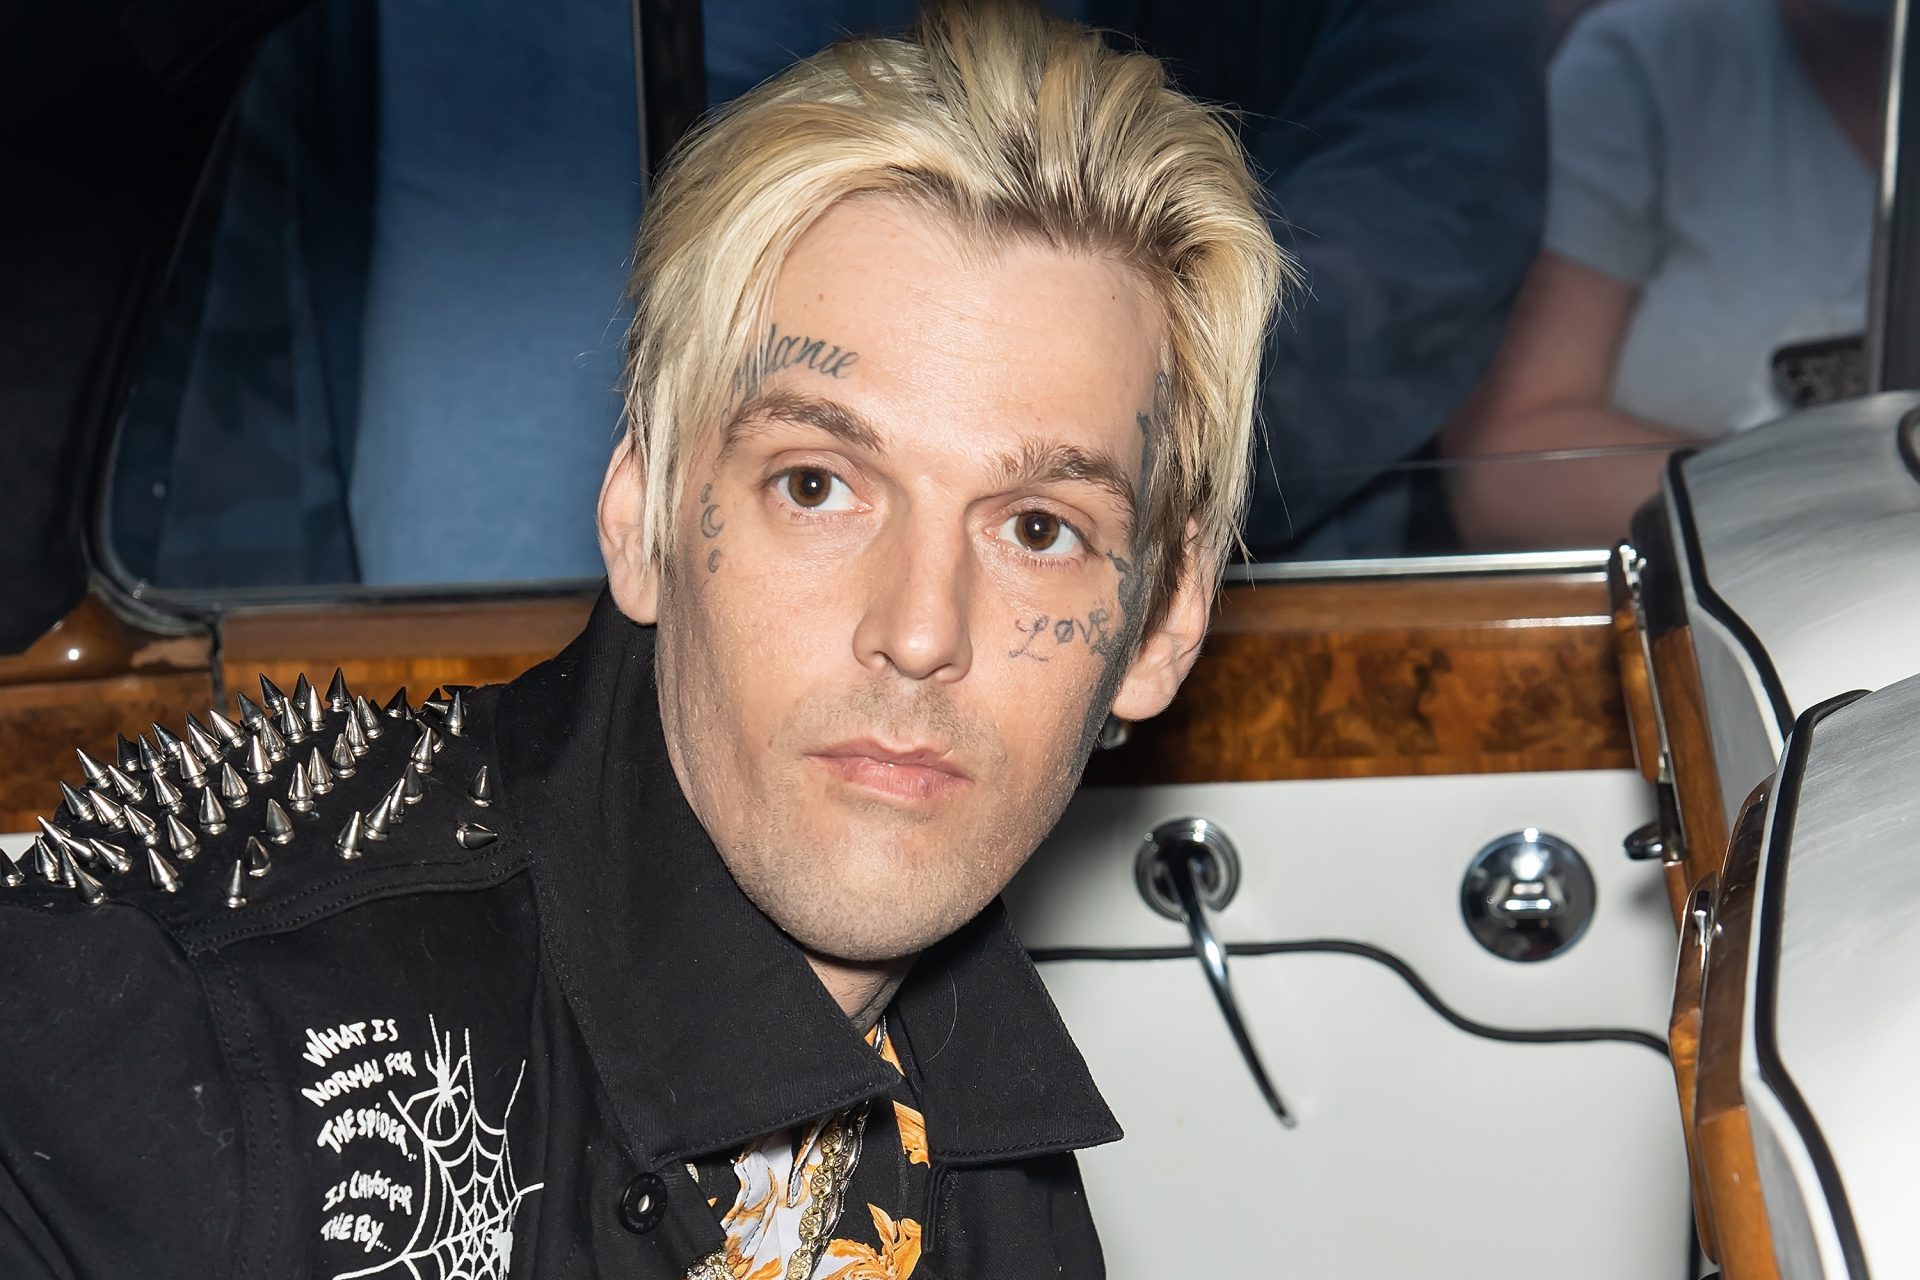 Sold: the house where Aaron Carter died. How much did it cost?